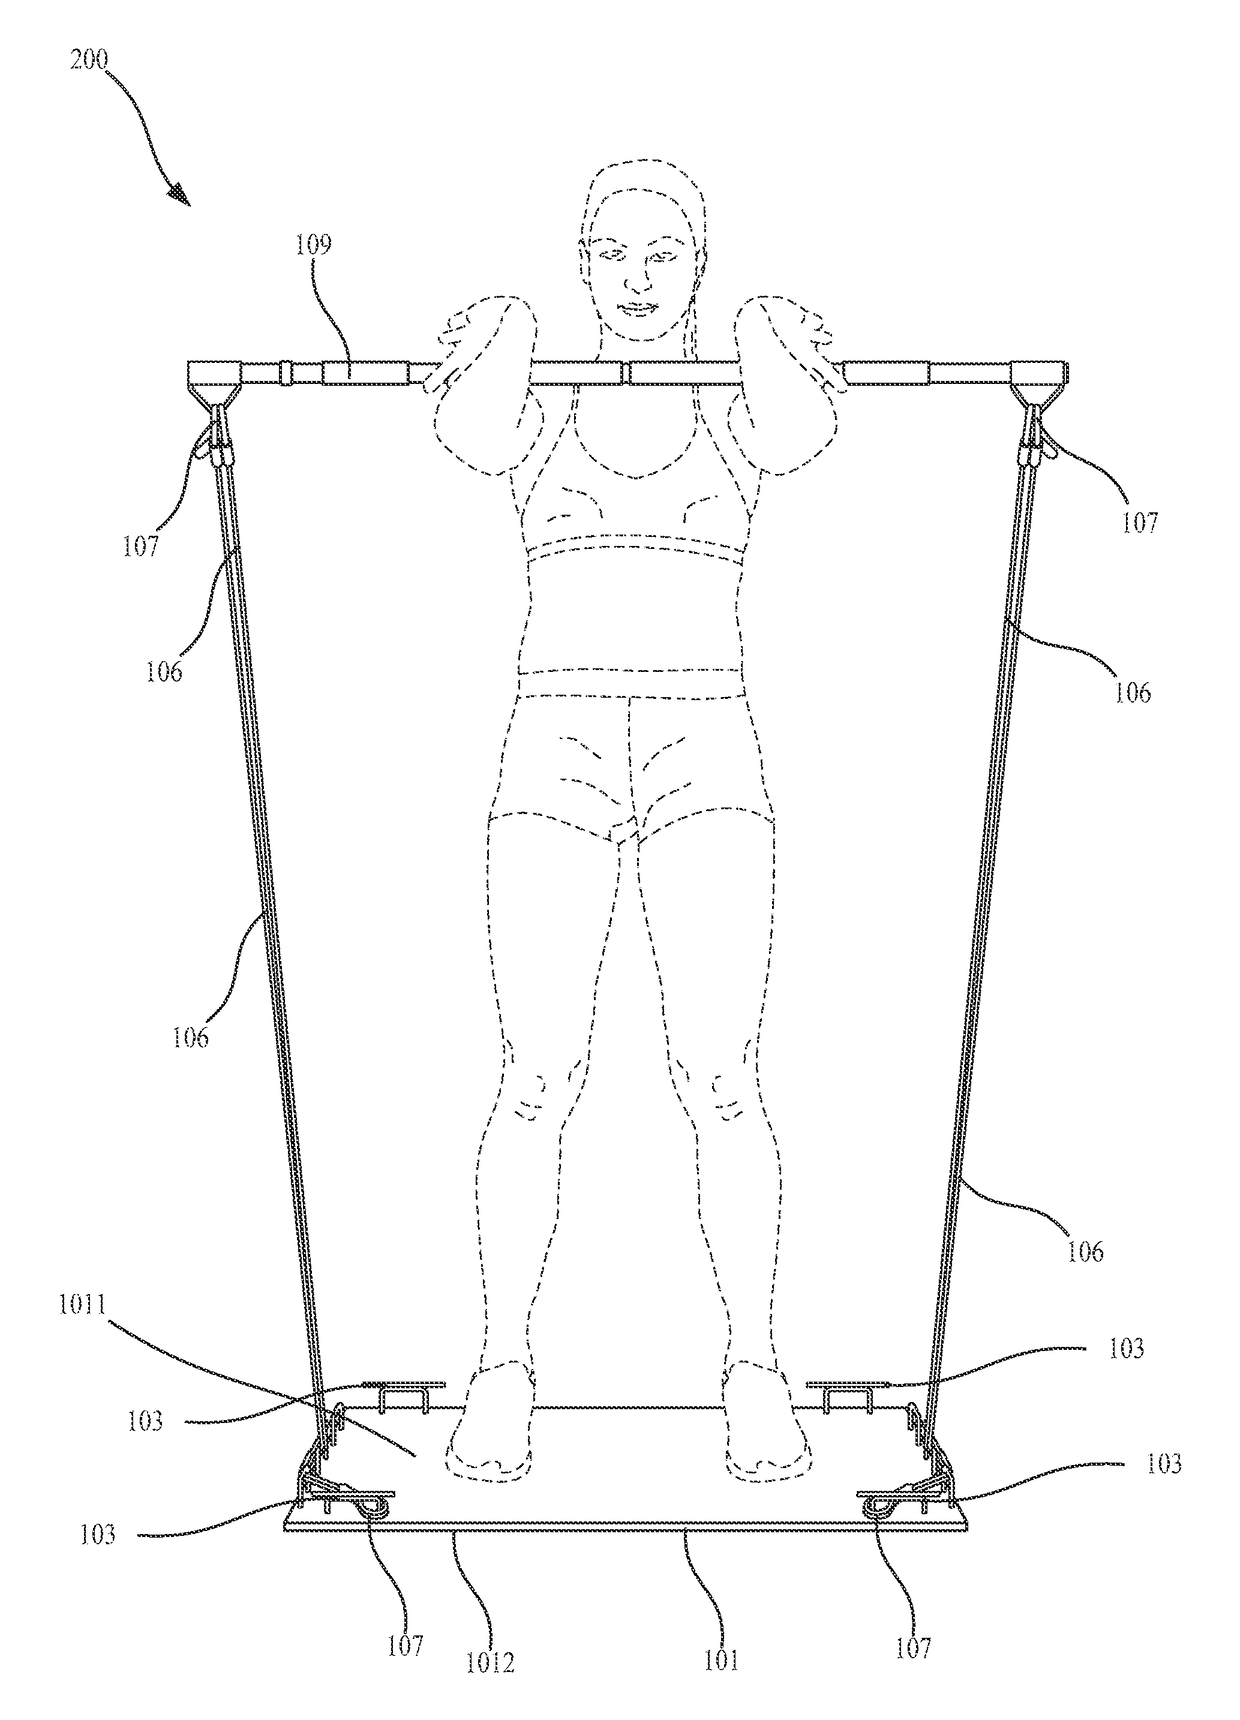 Portable resistance workout apparatuses and systems